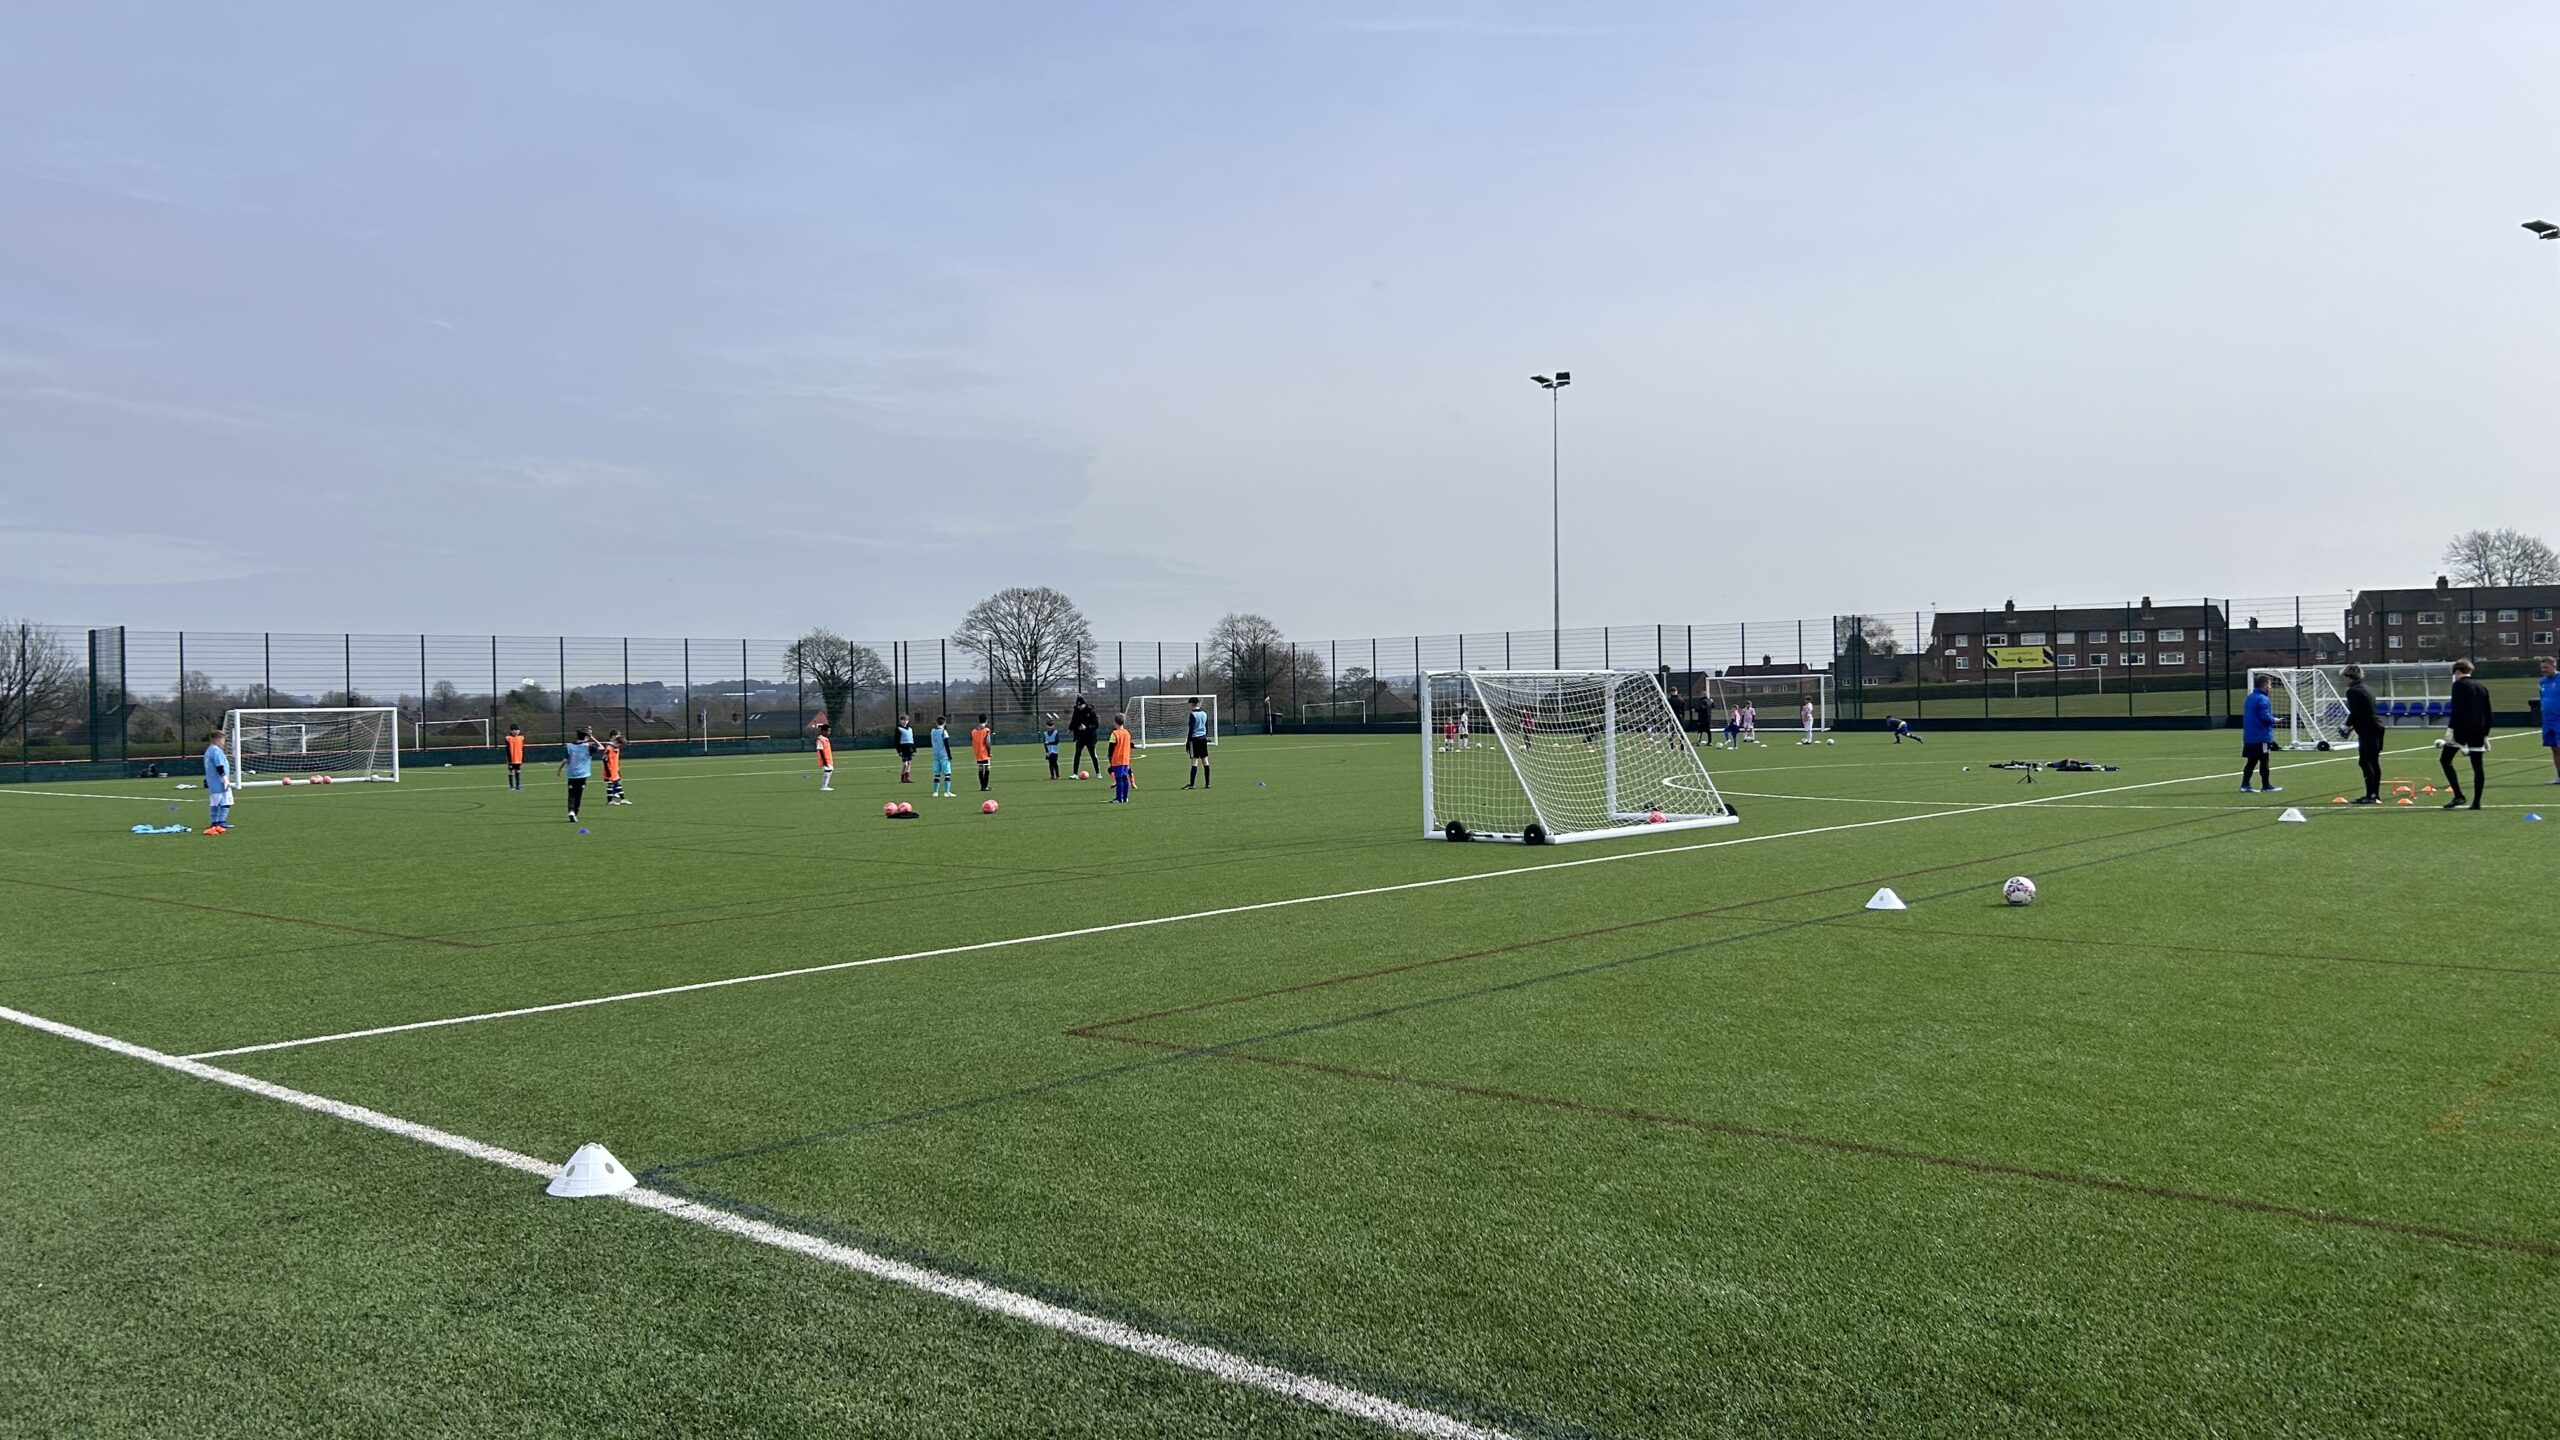 Green Goals: Project Better Energy Announces Sponsorship of Newcastle Town Football club